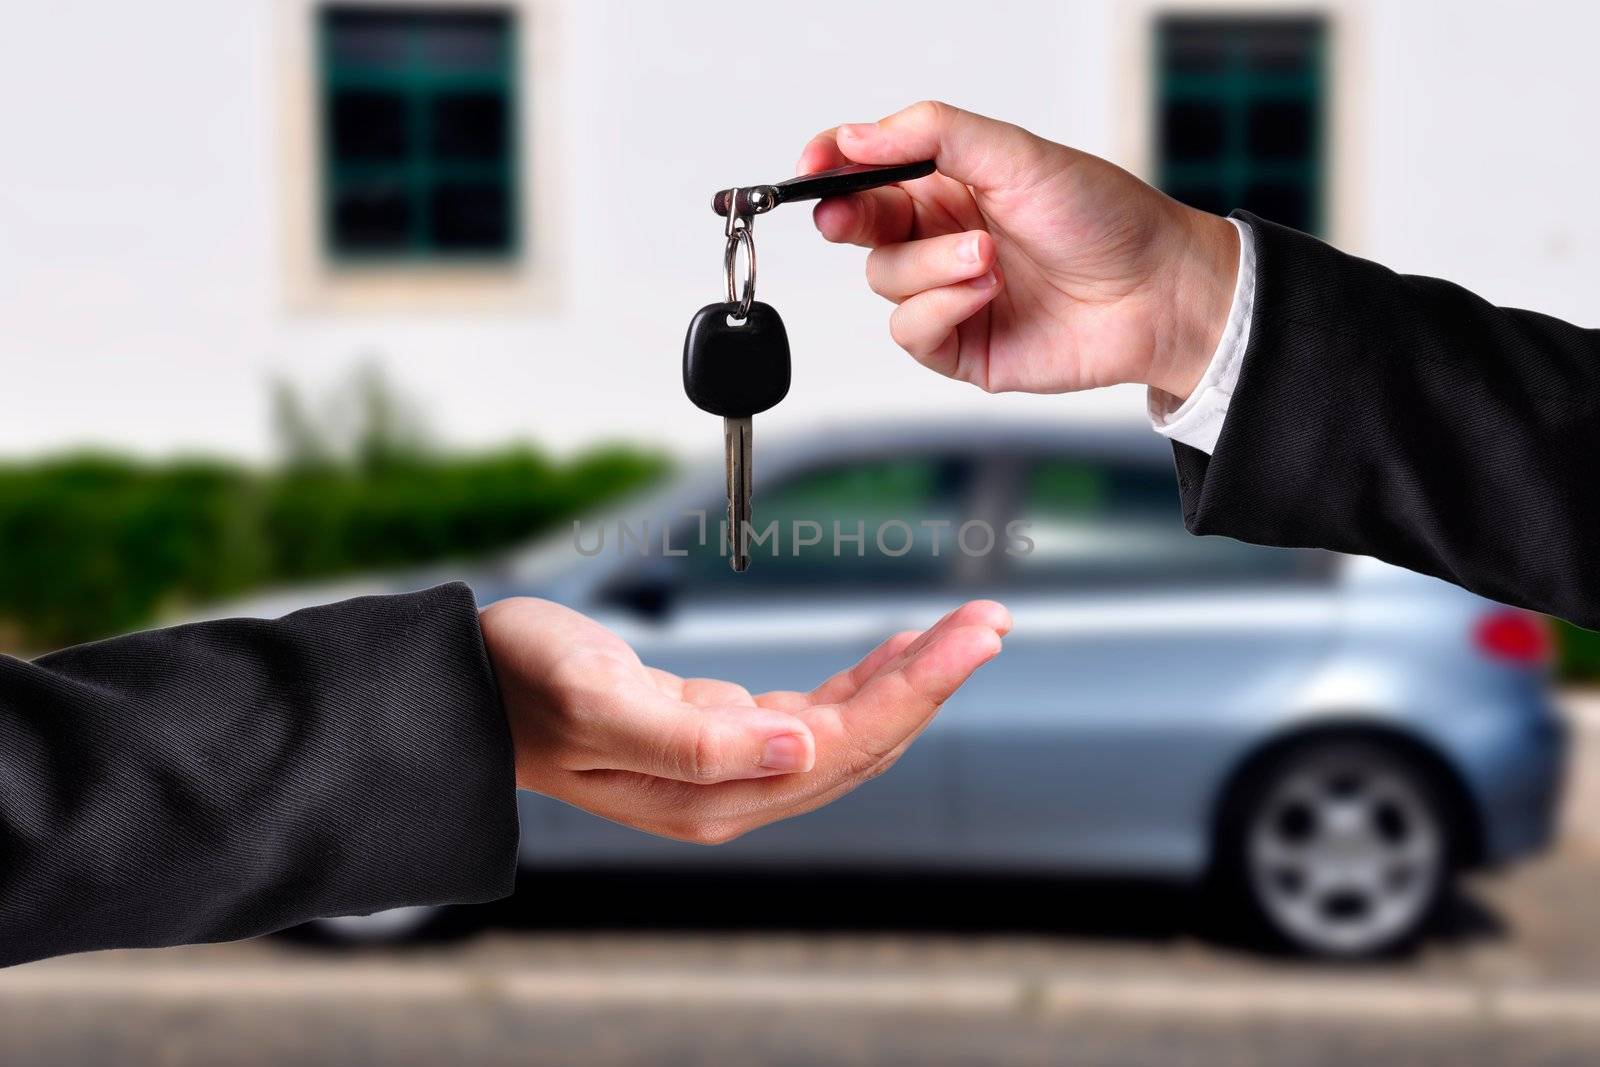 A hand giving a key to another hand. Both persons in suits. Car in the background.